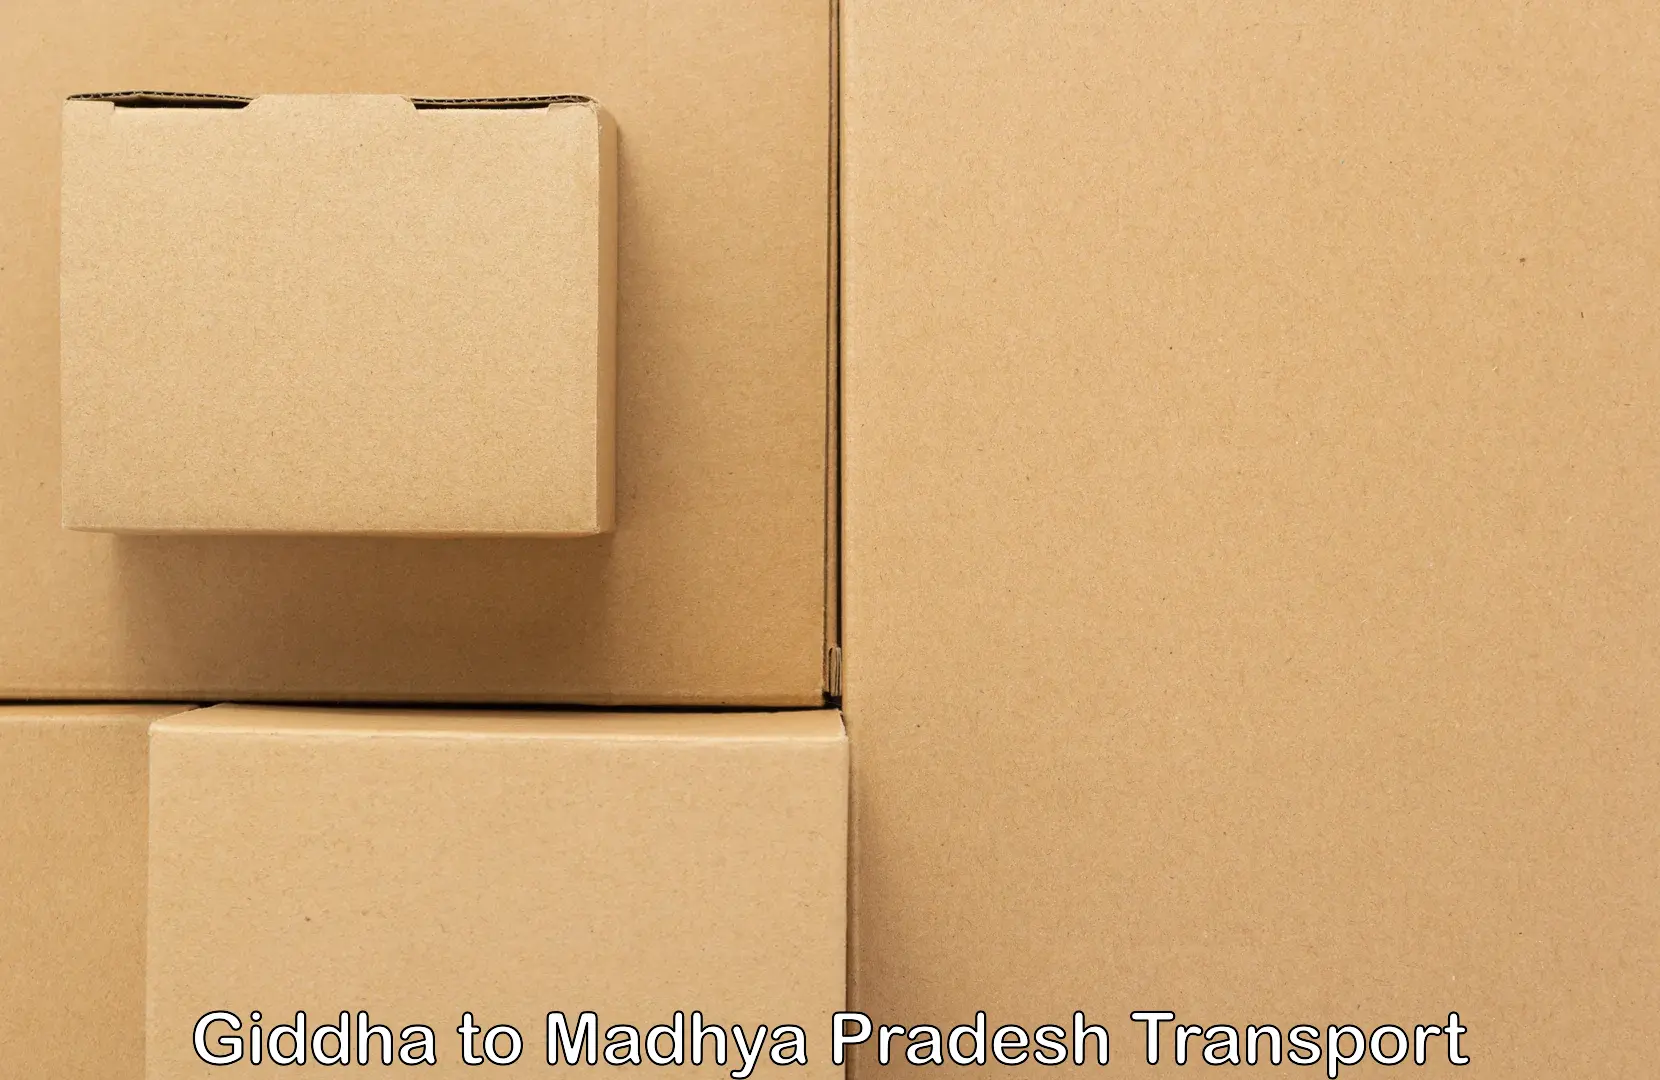 Shipping services Giddha to BHEL Bhopal